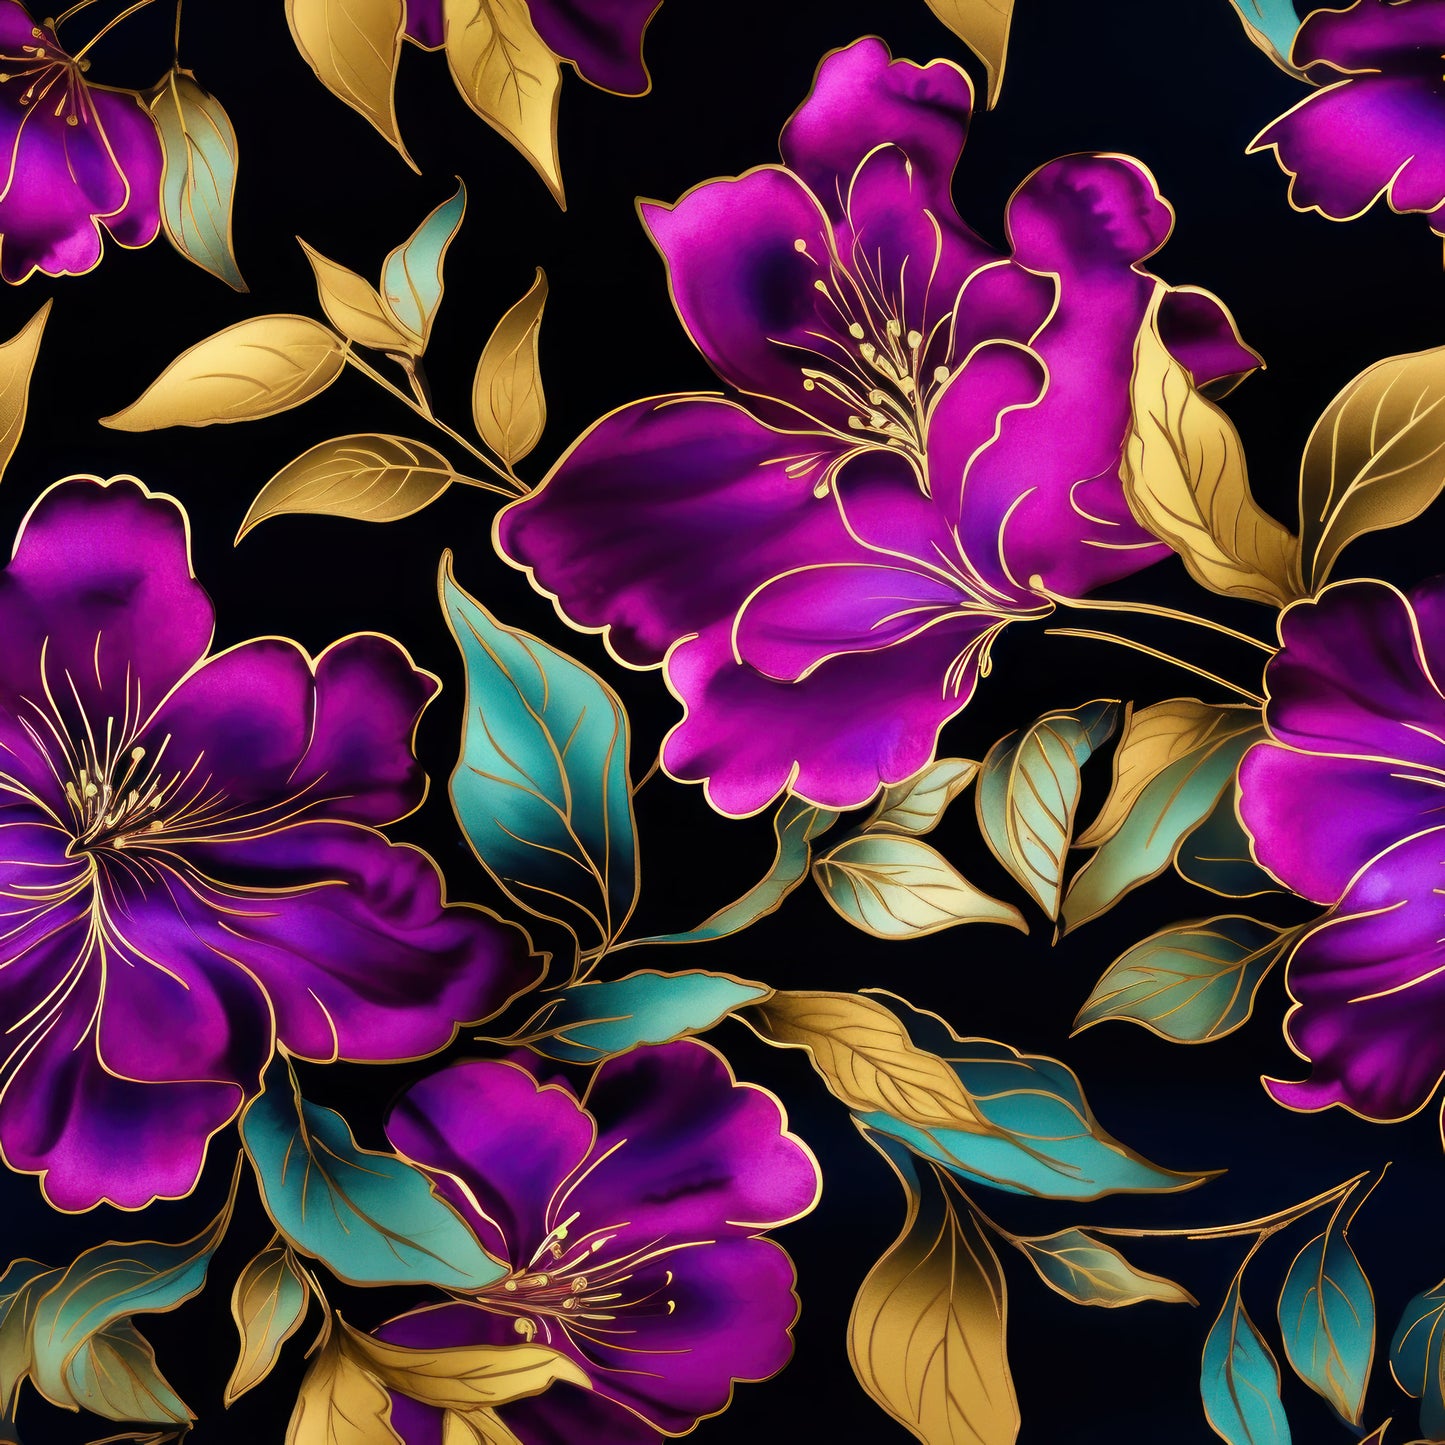 WATERCOLOR TEAL AND PURPLE FLORAL  - MULTIPLE VARIATIONS